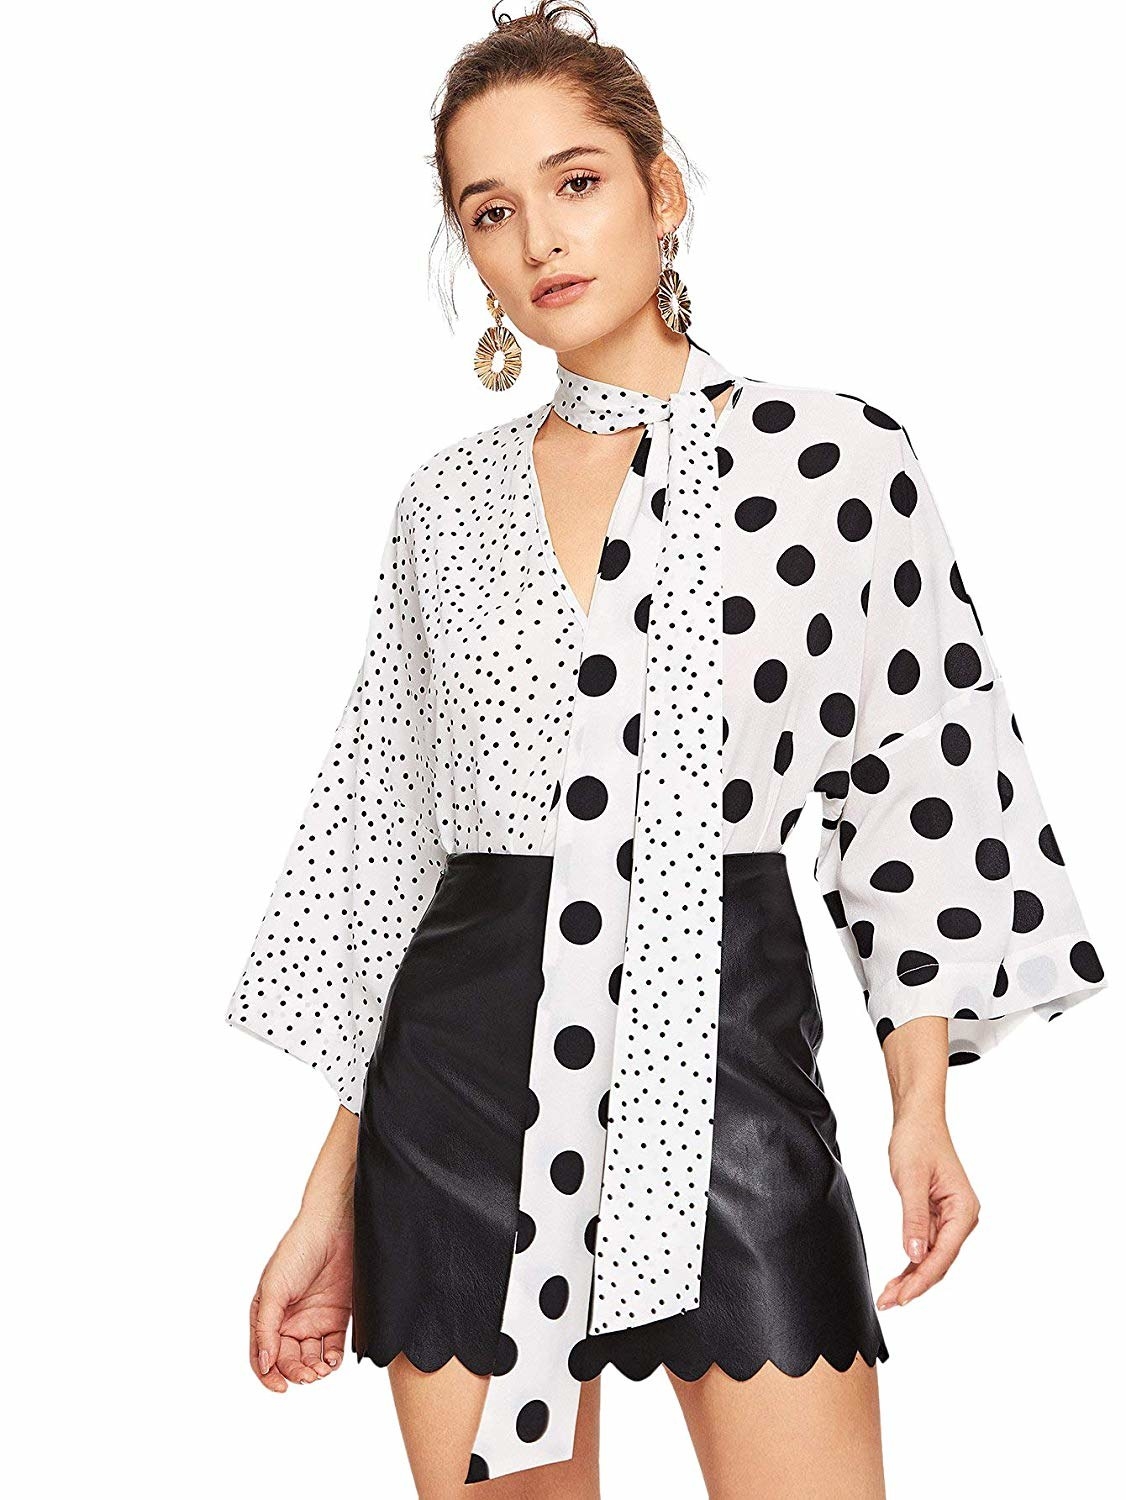 Model in the tie-neck blouse, with one side in white with tiny black polka-dots and the other half white with large black polka-dots